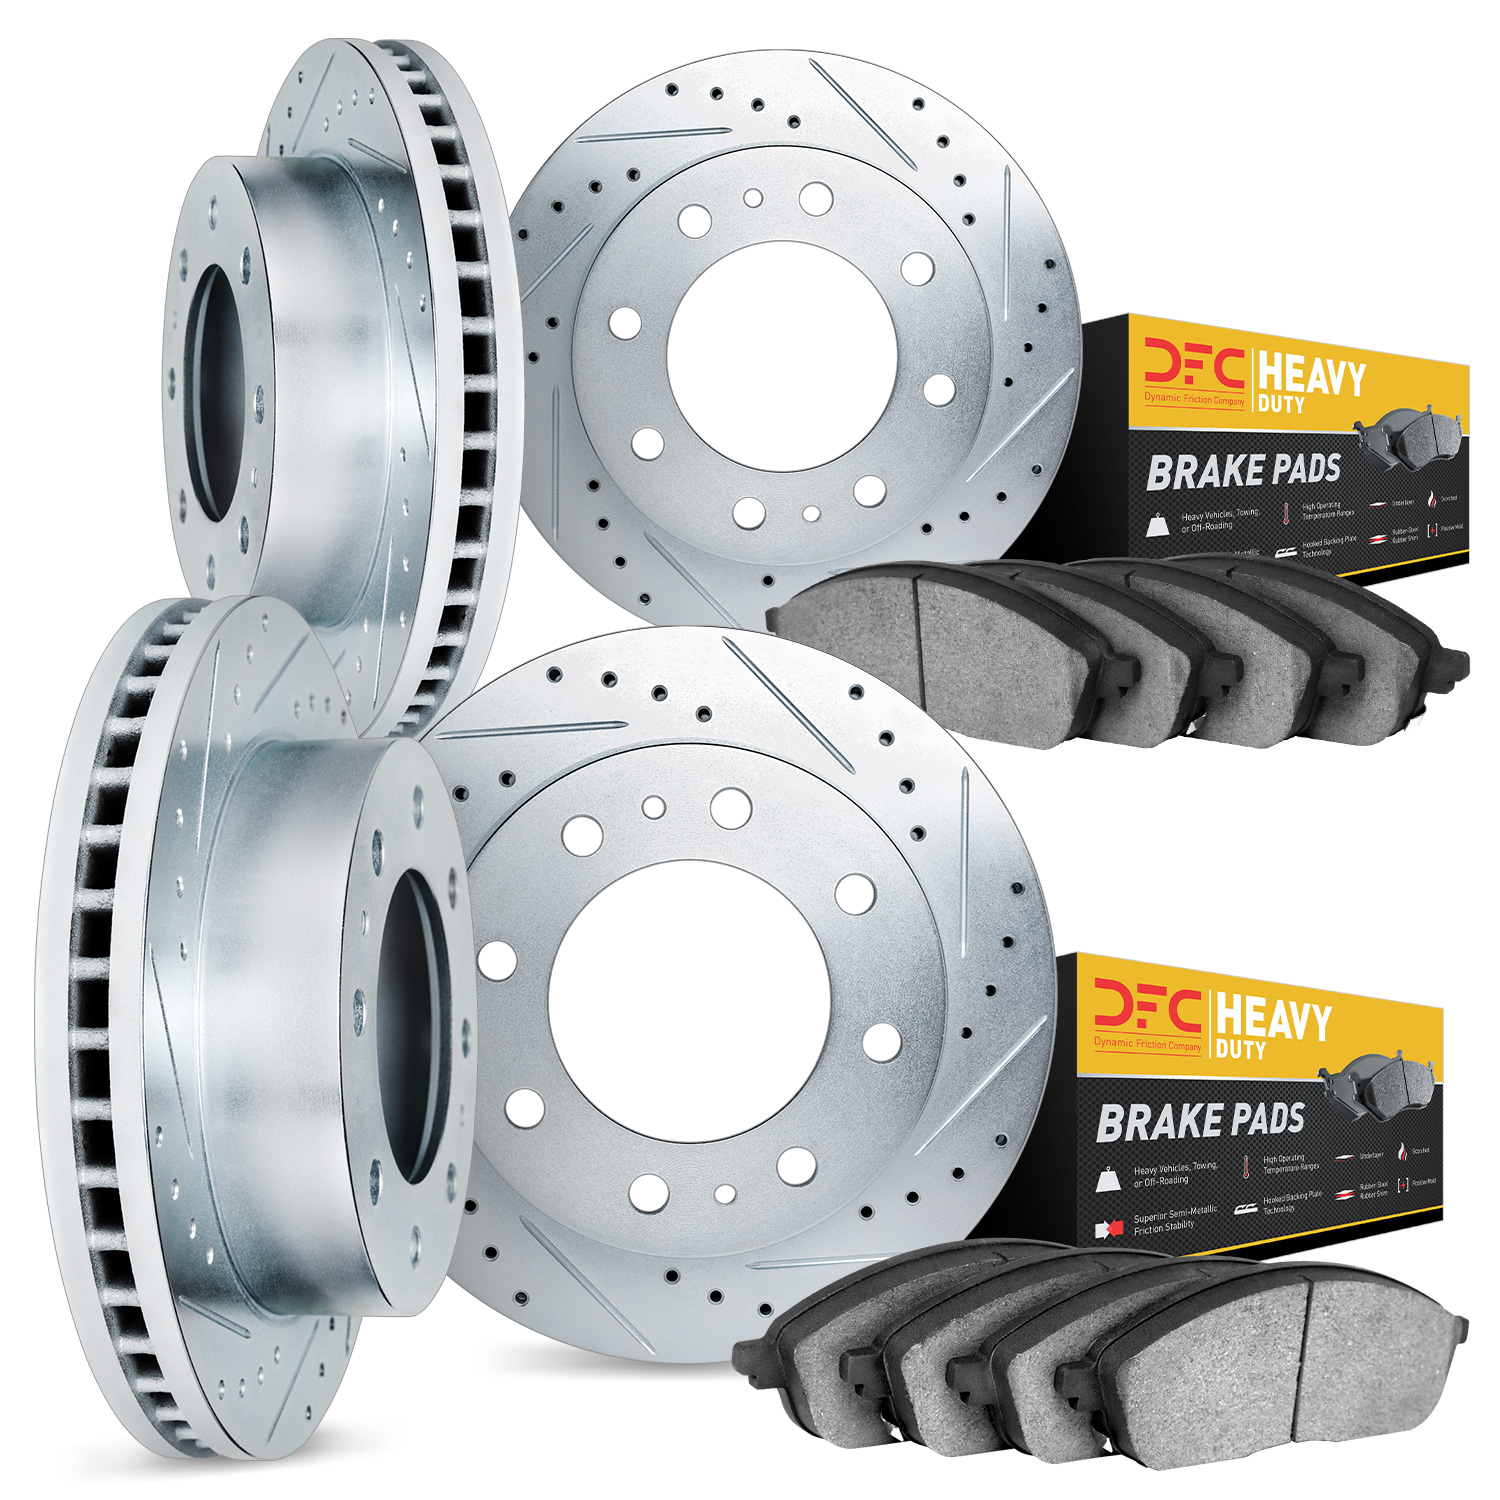 7204-40230 Drilled/Slotted Rotors w/Heavy-Duty Brake Pads Kit [Silver], 2009-2018 Mopar, Position: Front and Rear